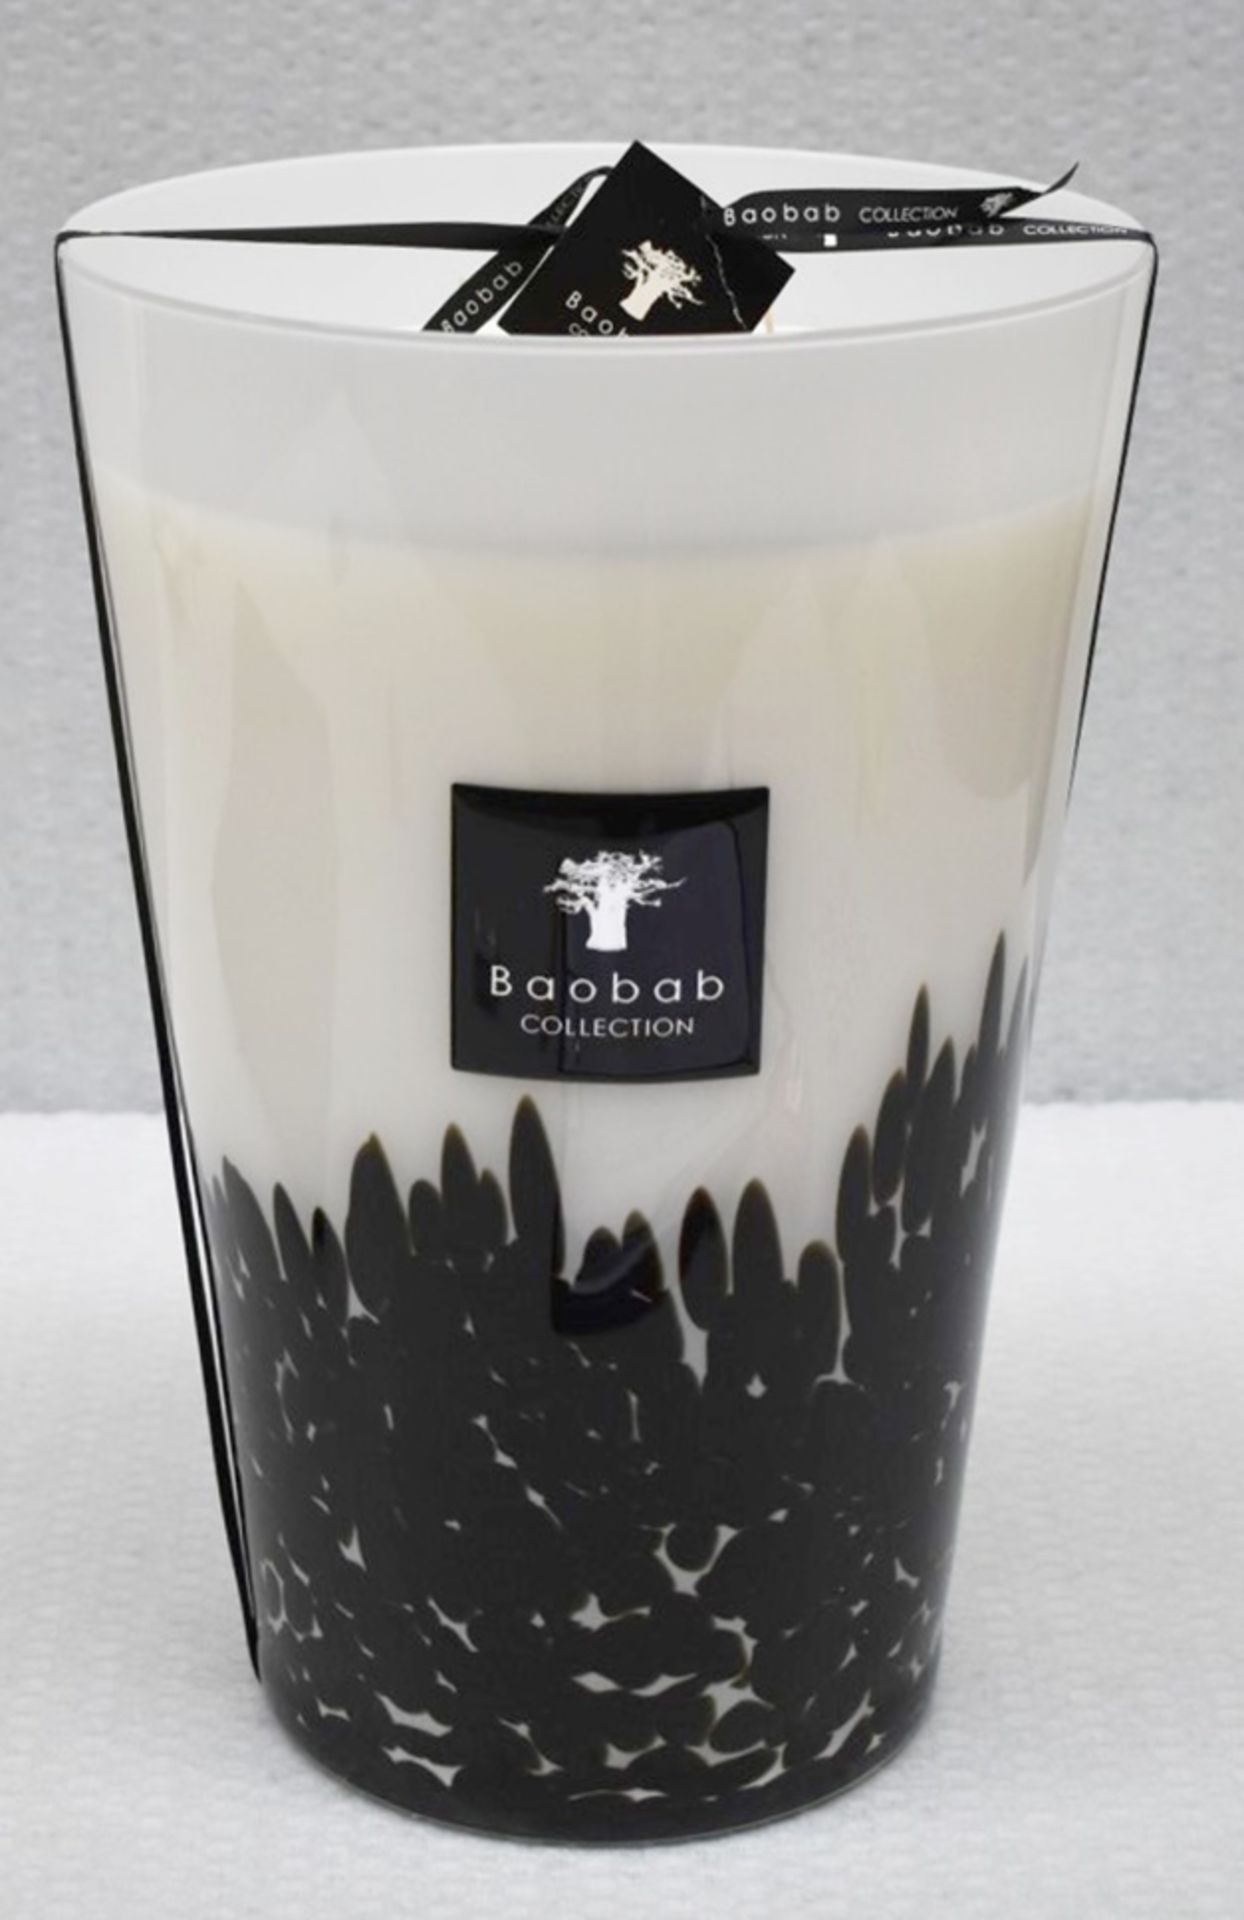 1 x BAOBAB COLLECTION 'Feathers Maxi' 7.5kg Luxury Candle - Boxed Stock - Original Price £428.00 - Image 5 of 10